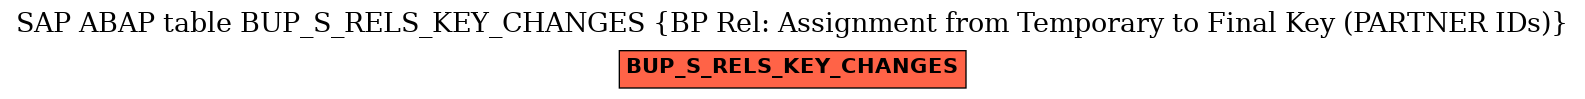 E-R Diagram for table BUP_S_RELS_KEY_CHANGES (BP Rel: Assignment from Temporary to Final Key (PARTNER IDs))